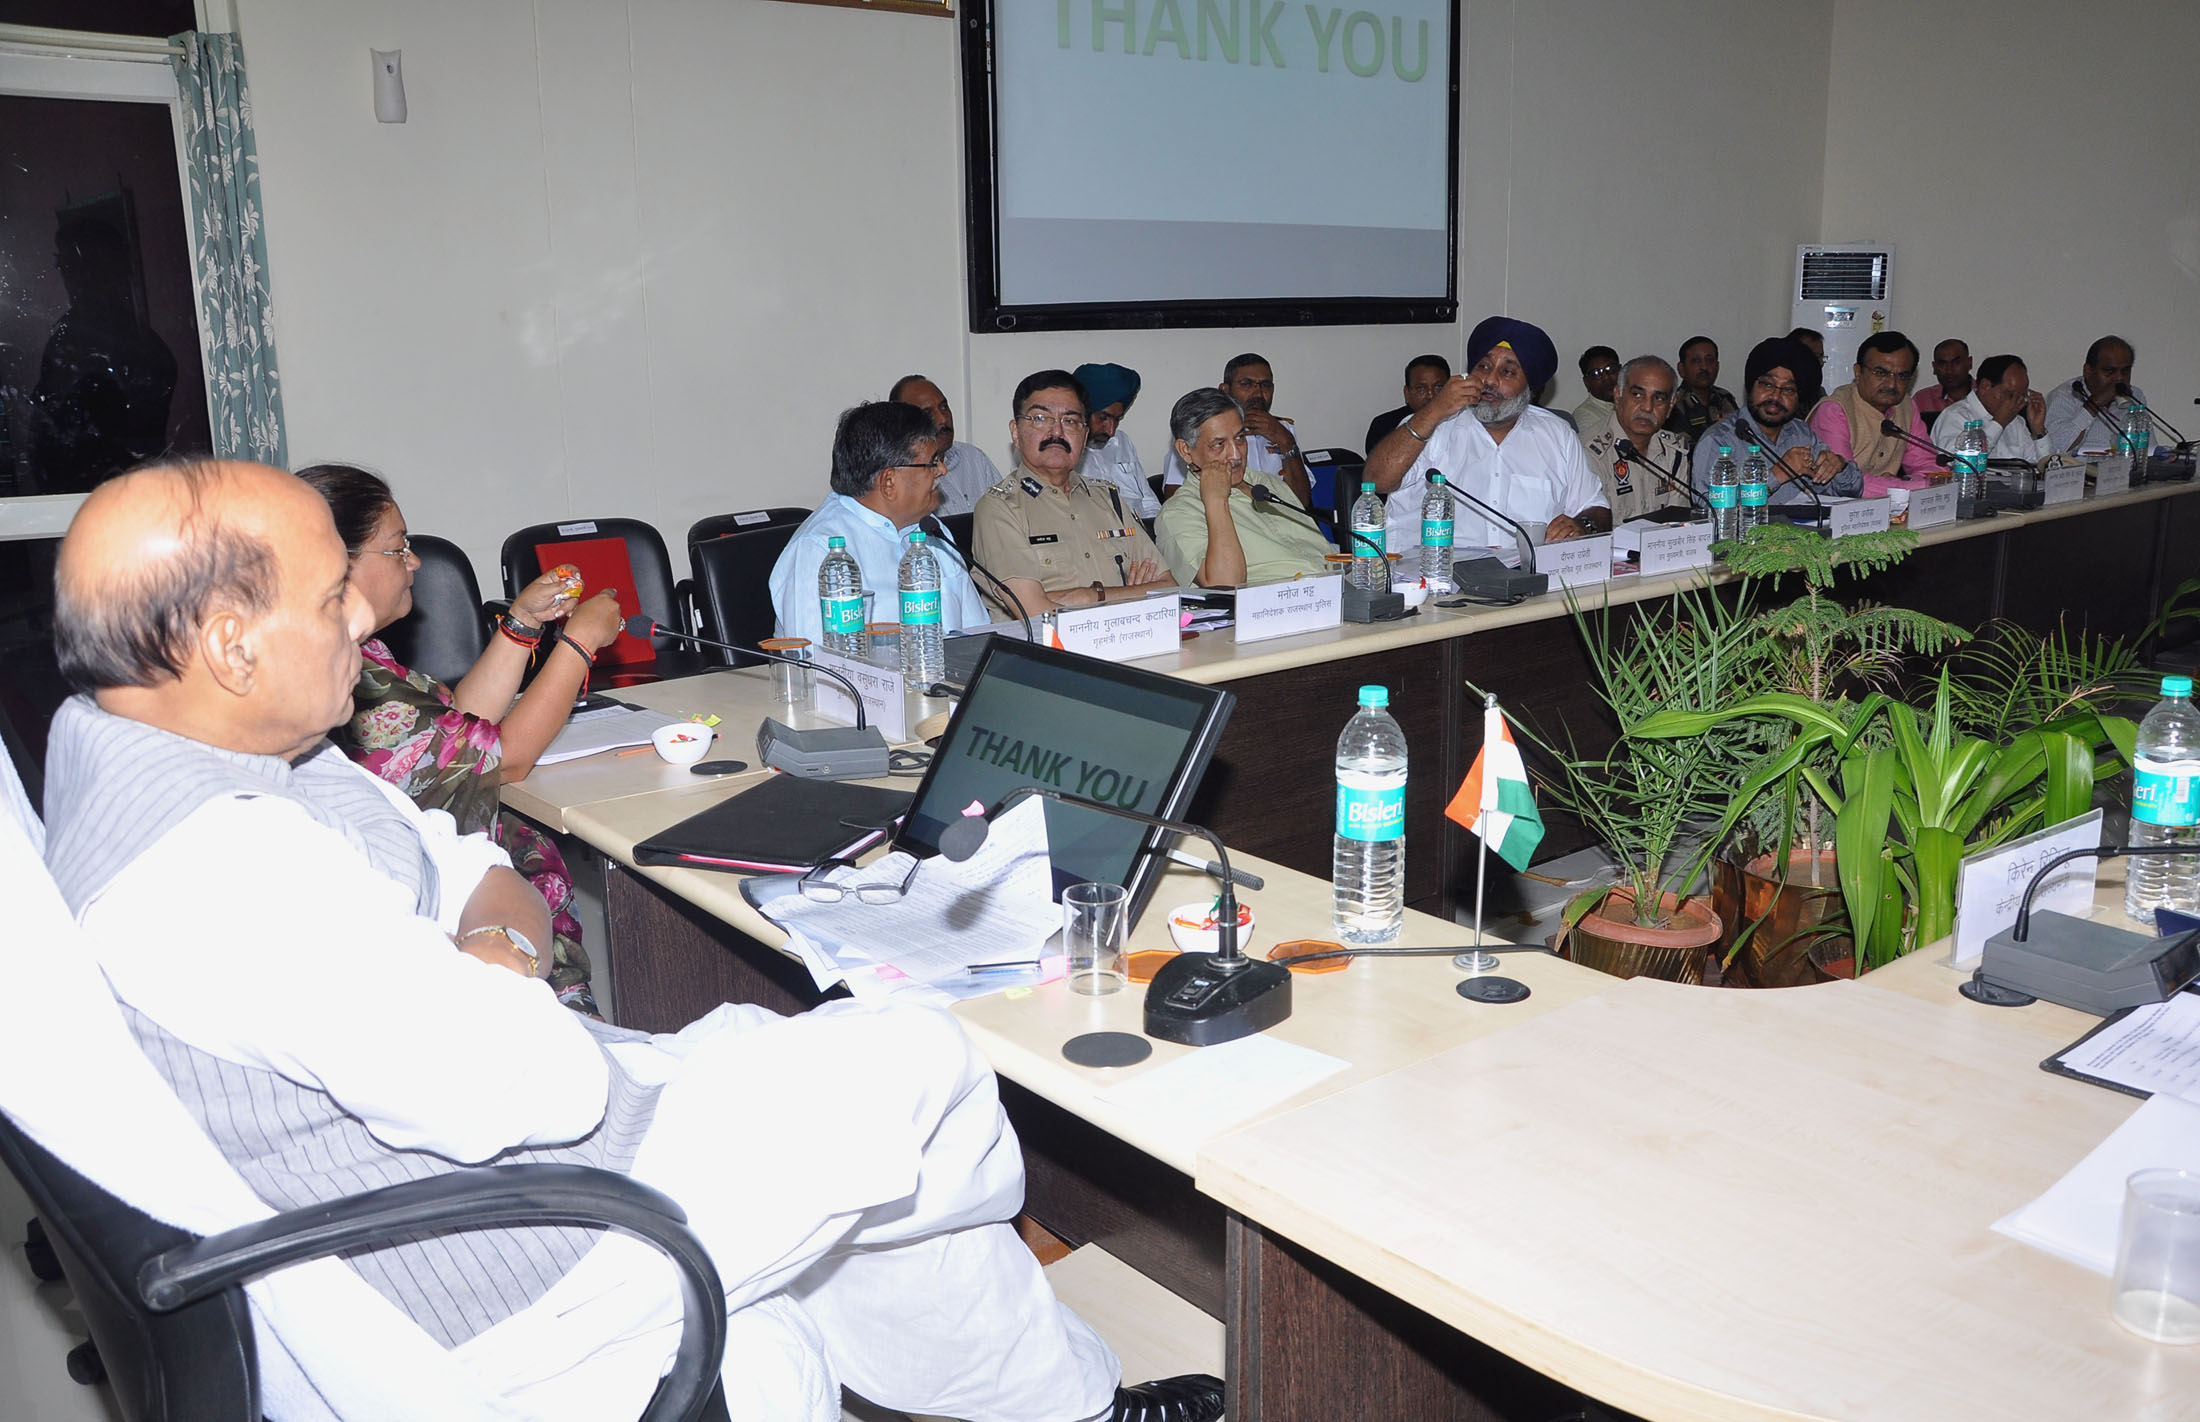 The Union Home Minister, Shri Rajnath Singh chairing a meeting with the Chief Ministers/ Home Ministers of Rajasthan, Gujarat, Punjab & J&K for sealing of Indo-Pak border, in Jaisalmer on October 07, 2016. The Chief Minister of Rajasthan, Smt. Vasundhara Raje Scindia, the Deputy Chief Minister of Punjab, Shri Sukhbir Singh Badal, the Home Minister of Rajasthan, Shri Gulab Chand Kataria, the Minister of State (Home), Gujarat, Shri Pradeep Sinh B. Jadeja and senior officers from the States are also seen.